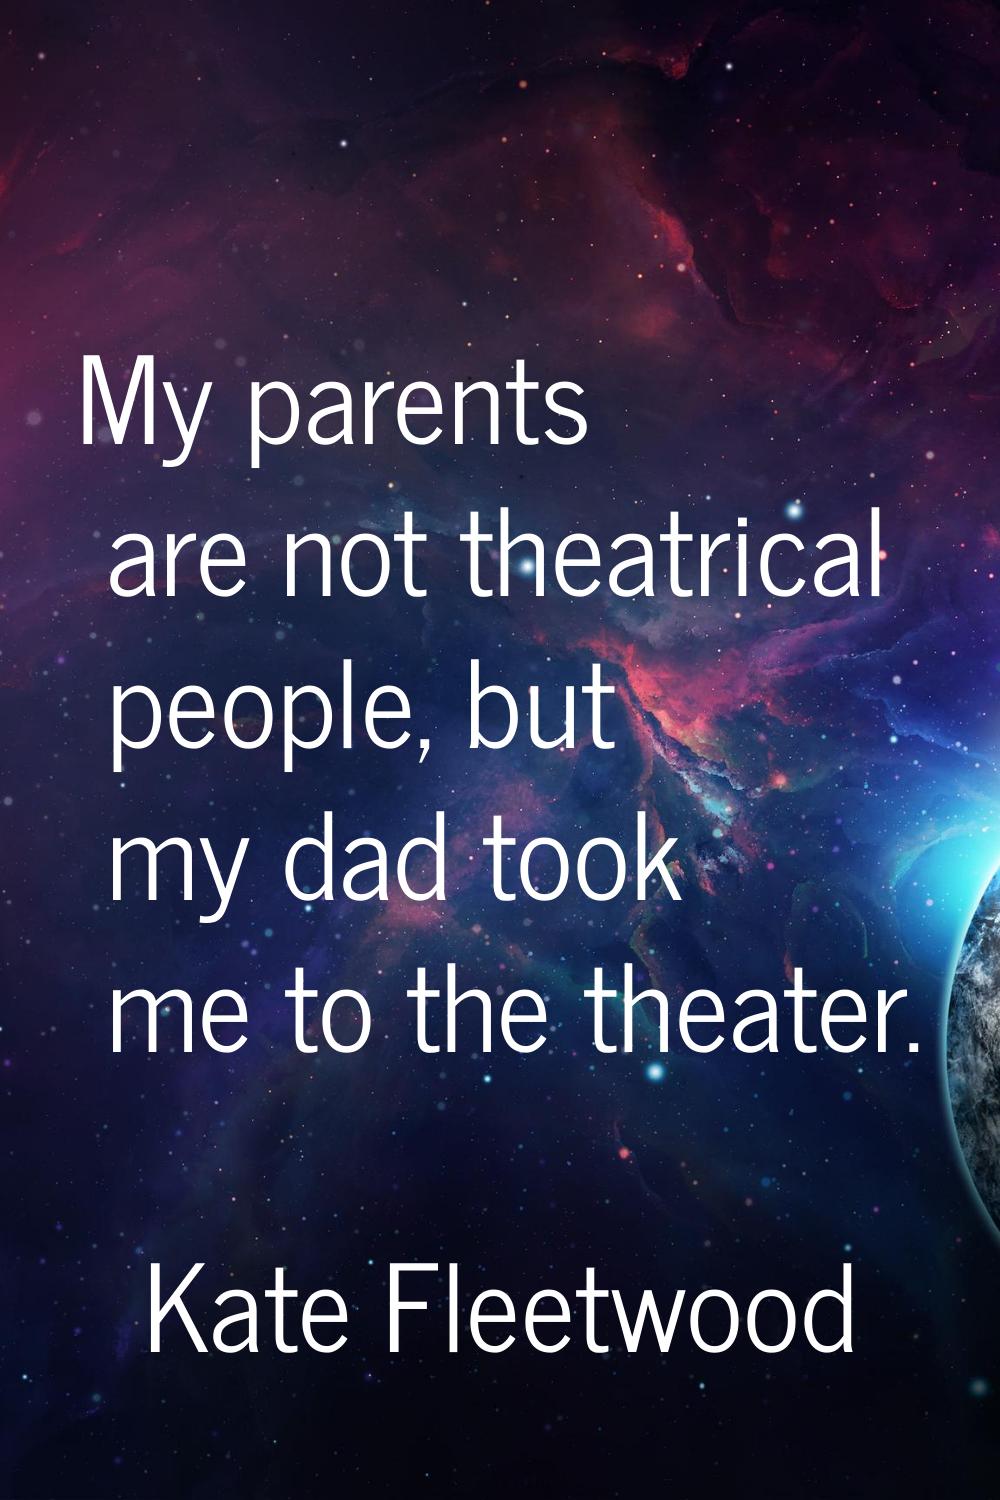 My parents are not theatrical people, but my dad took me to the theater.